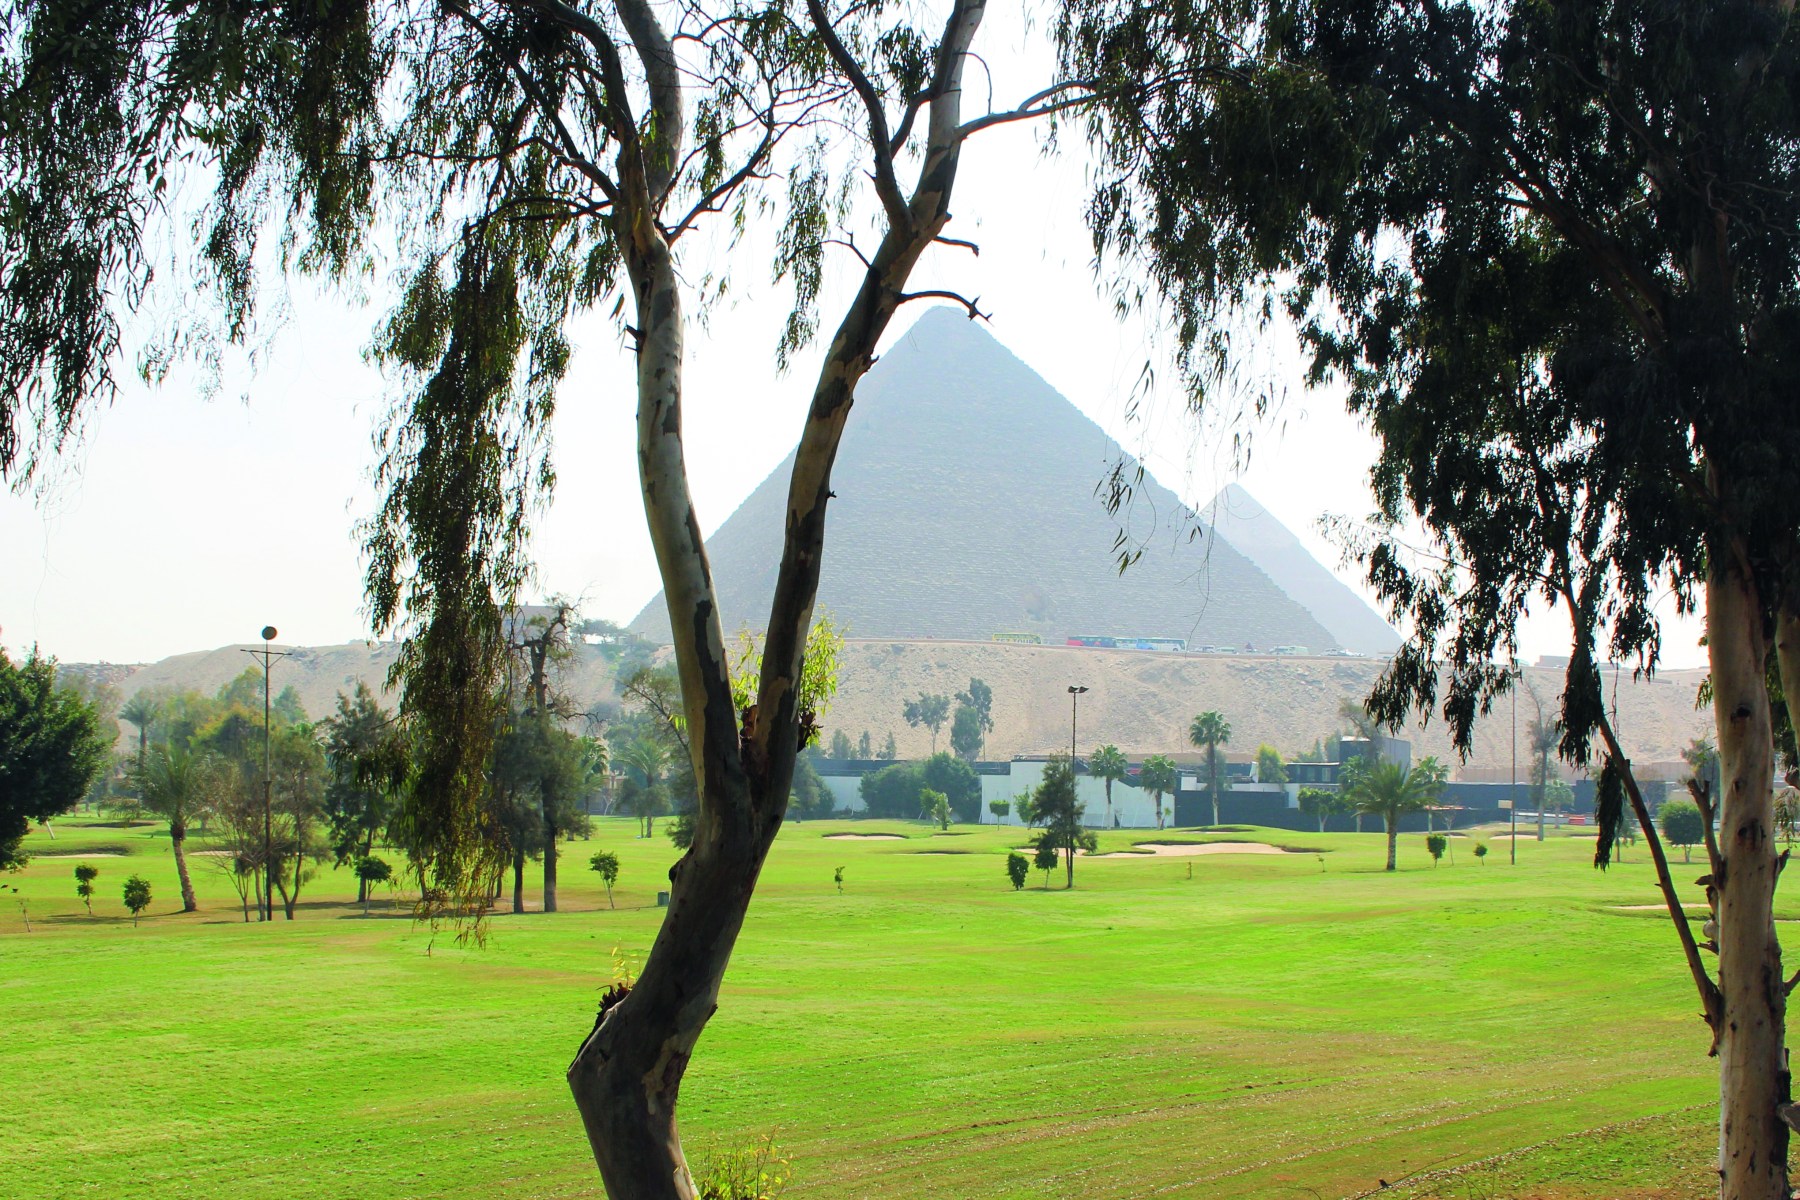 <strong>MARRIOTT MENA HOUSE GOLF COURSE</strong>, Egypt. You’ll be golfing next to the Great Pyramid of Giza.<br> <br>Waldek says: “The historic Marriott Mena House hotel that abuts The Great Pyramid of Giza, the only one of the Seven Wonders of the Ancient World that exists today, is home to a nine-hole course that was originally built in 1899. While the course isn’t the largest or most challenging in the world, it is certainly in one of the world’s best locations.”<br>